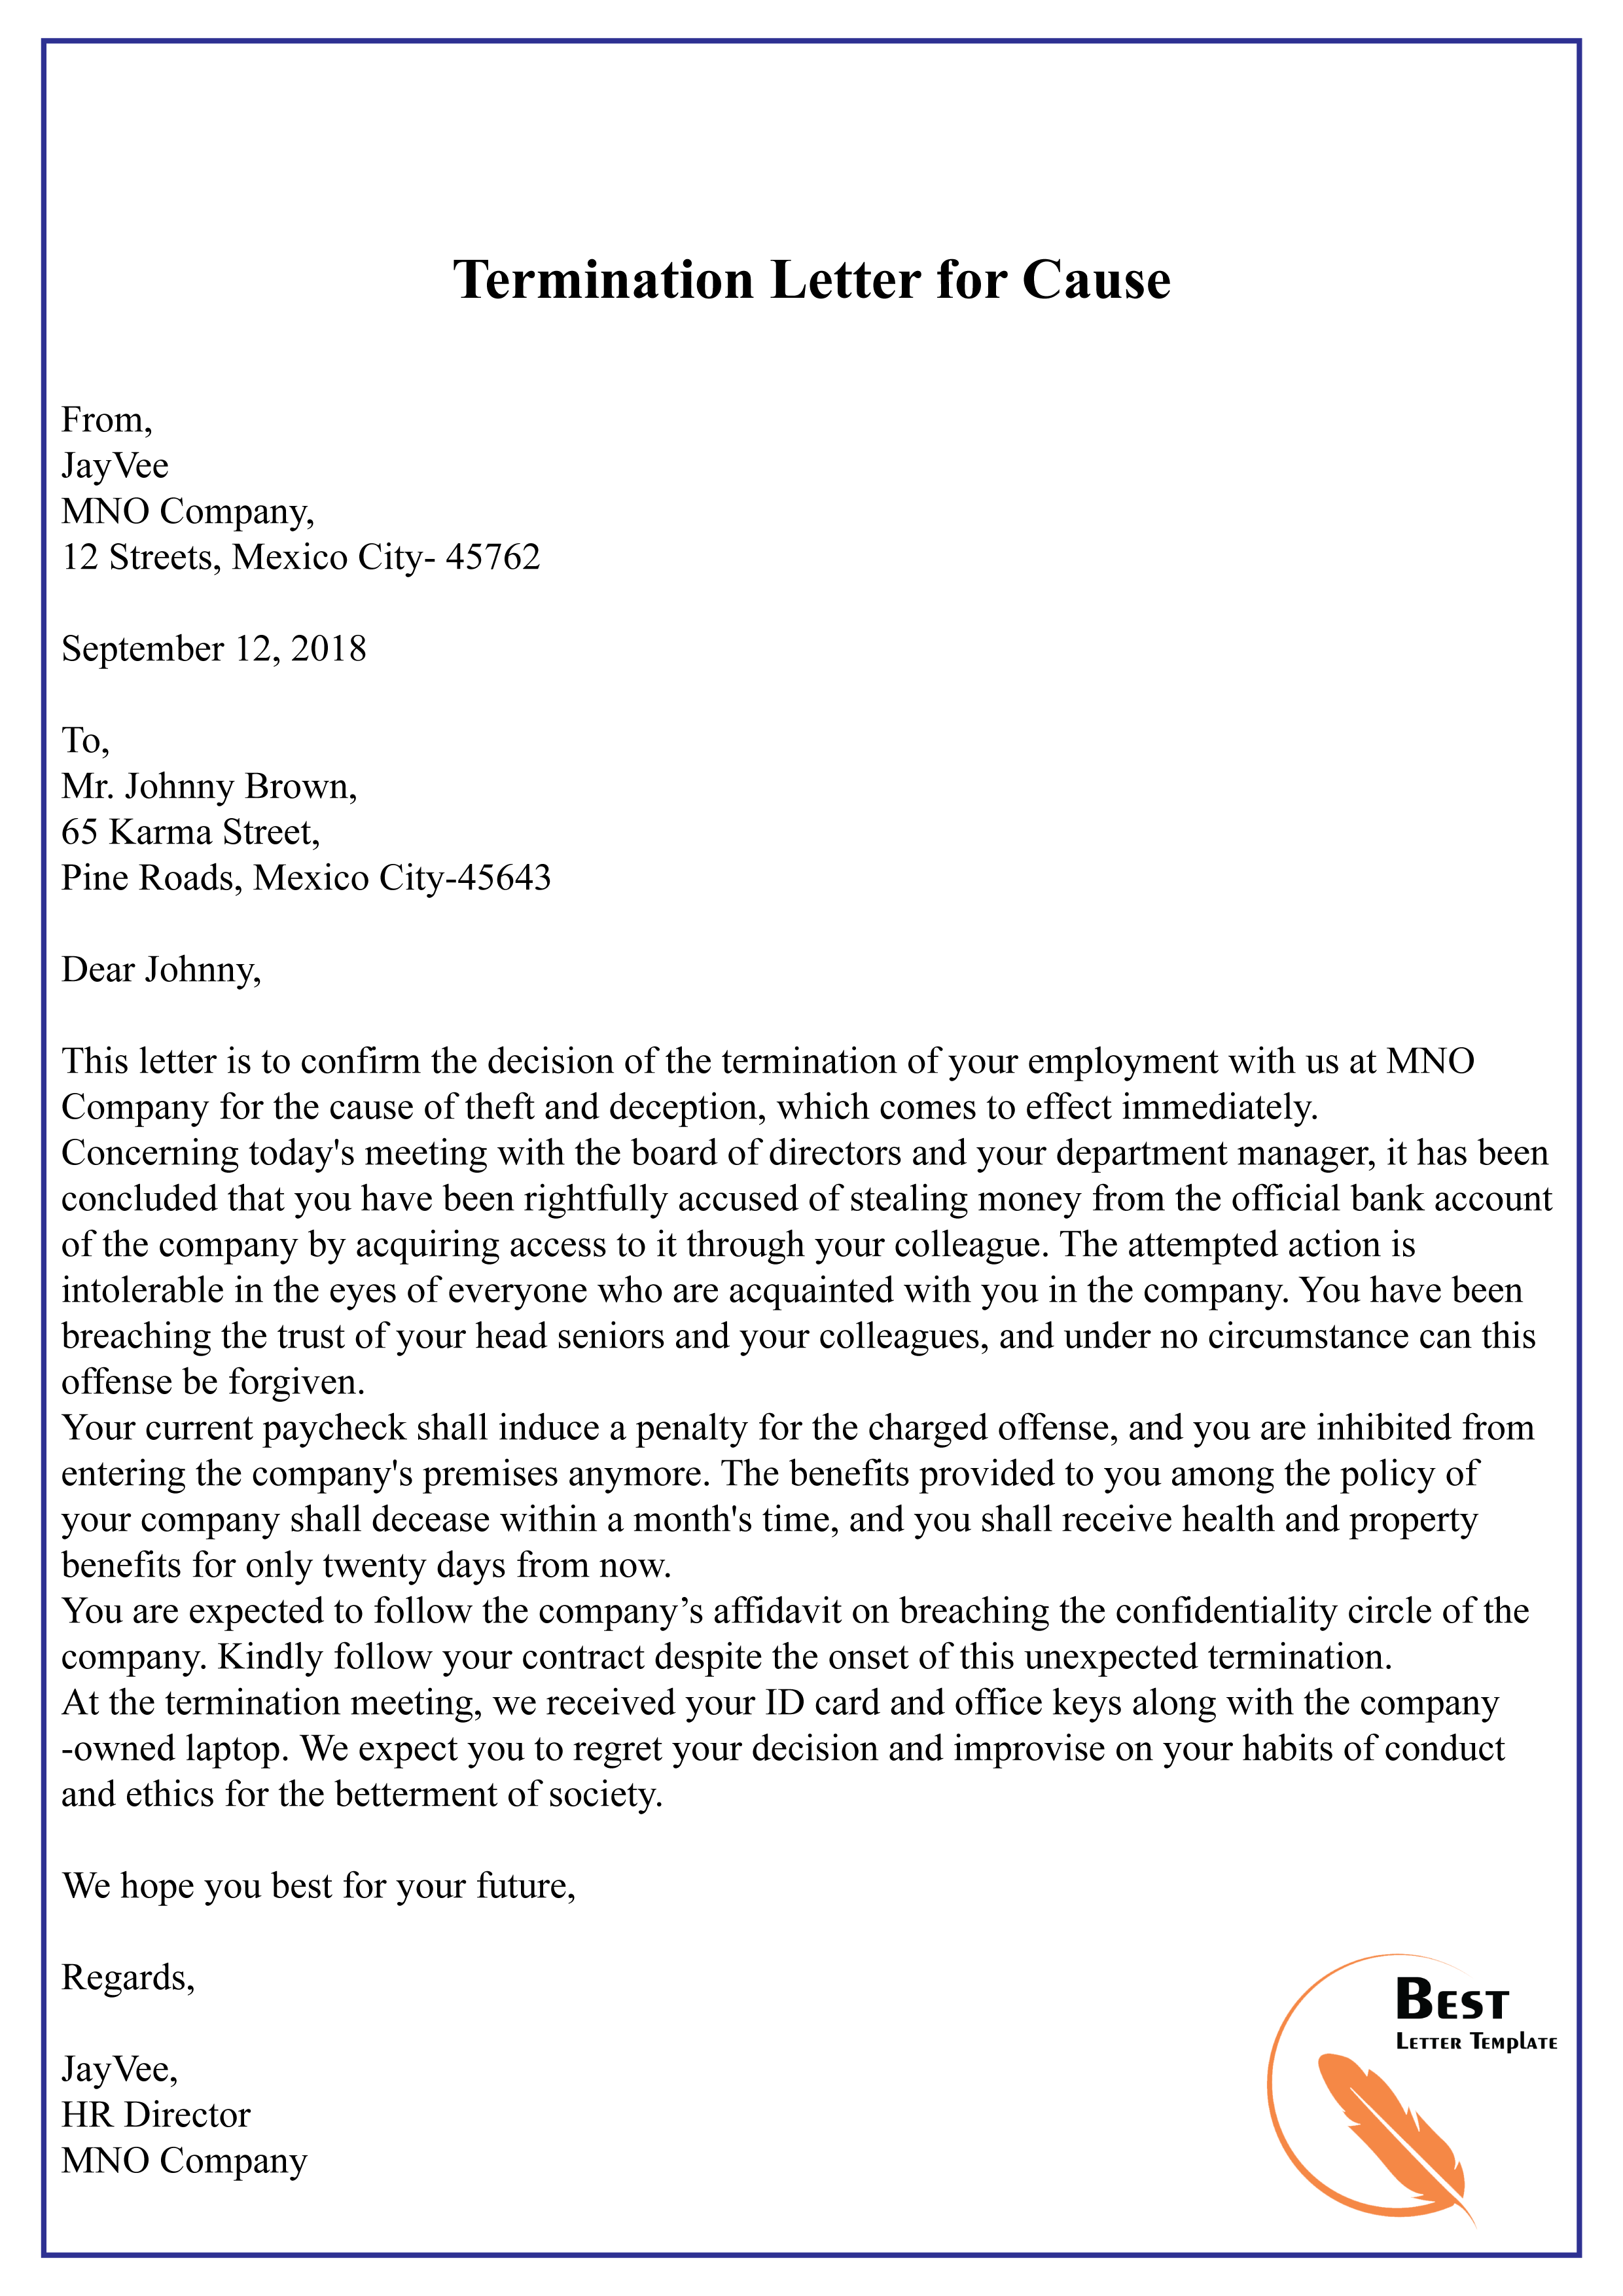 Attorney Termination Letter Template from bestlettertemplate.com